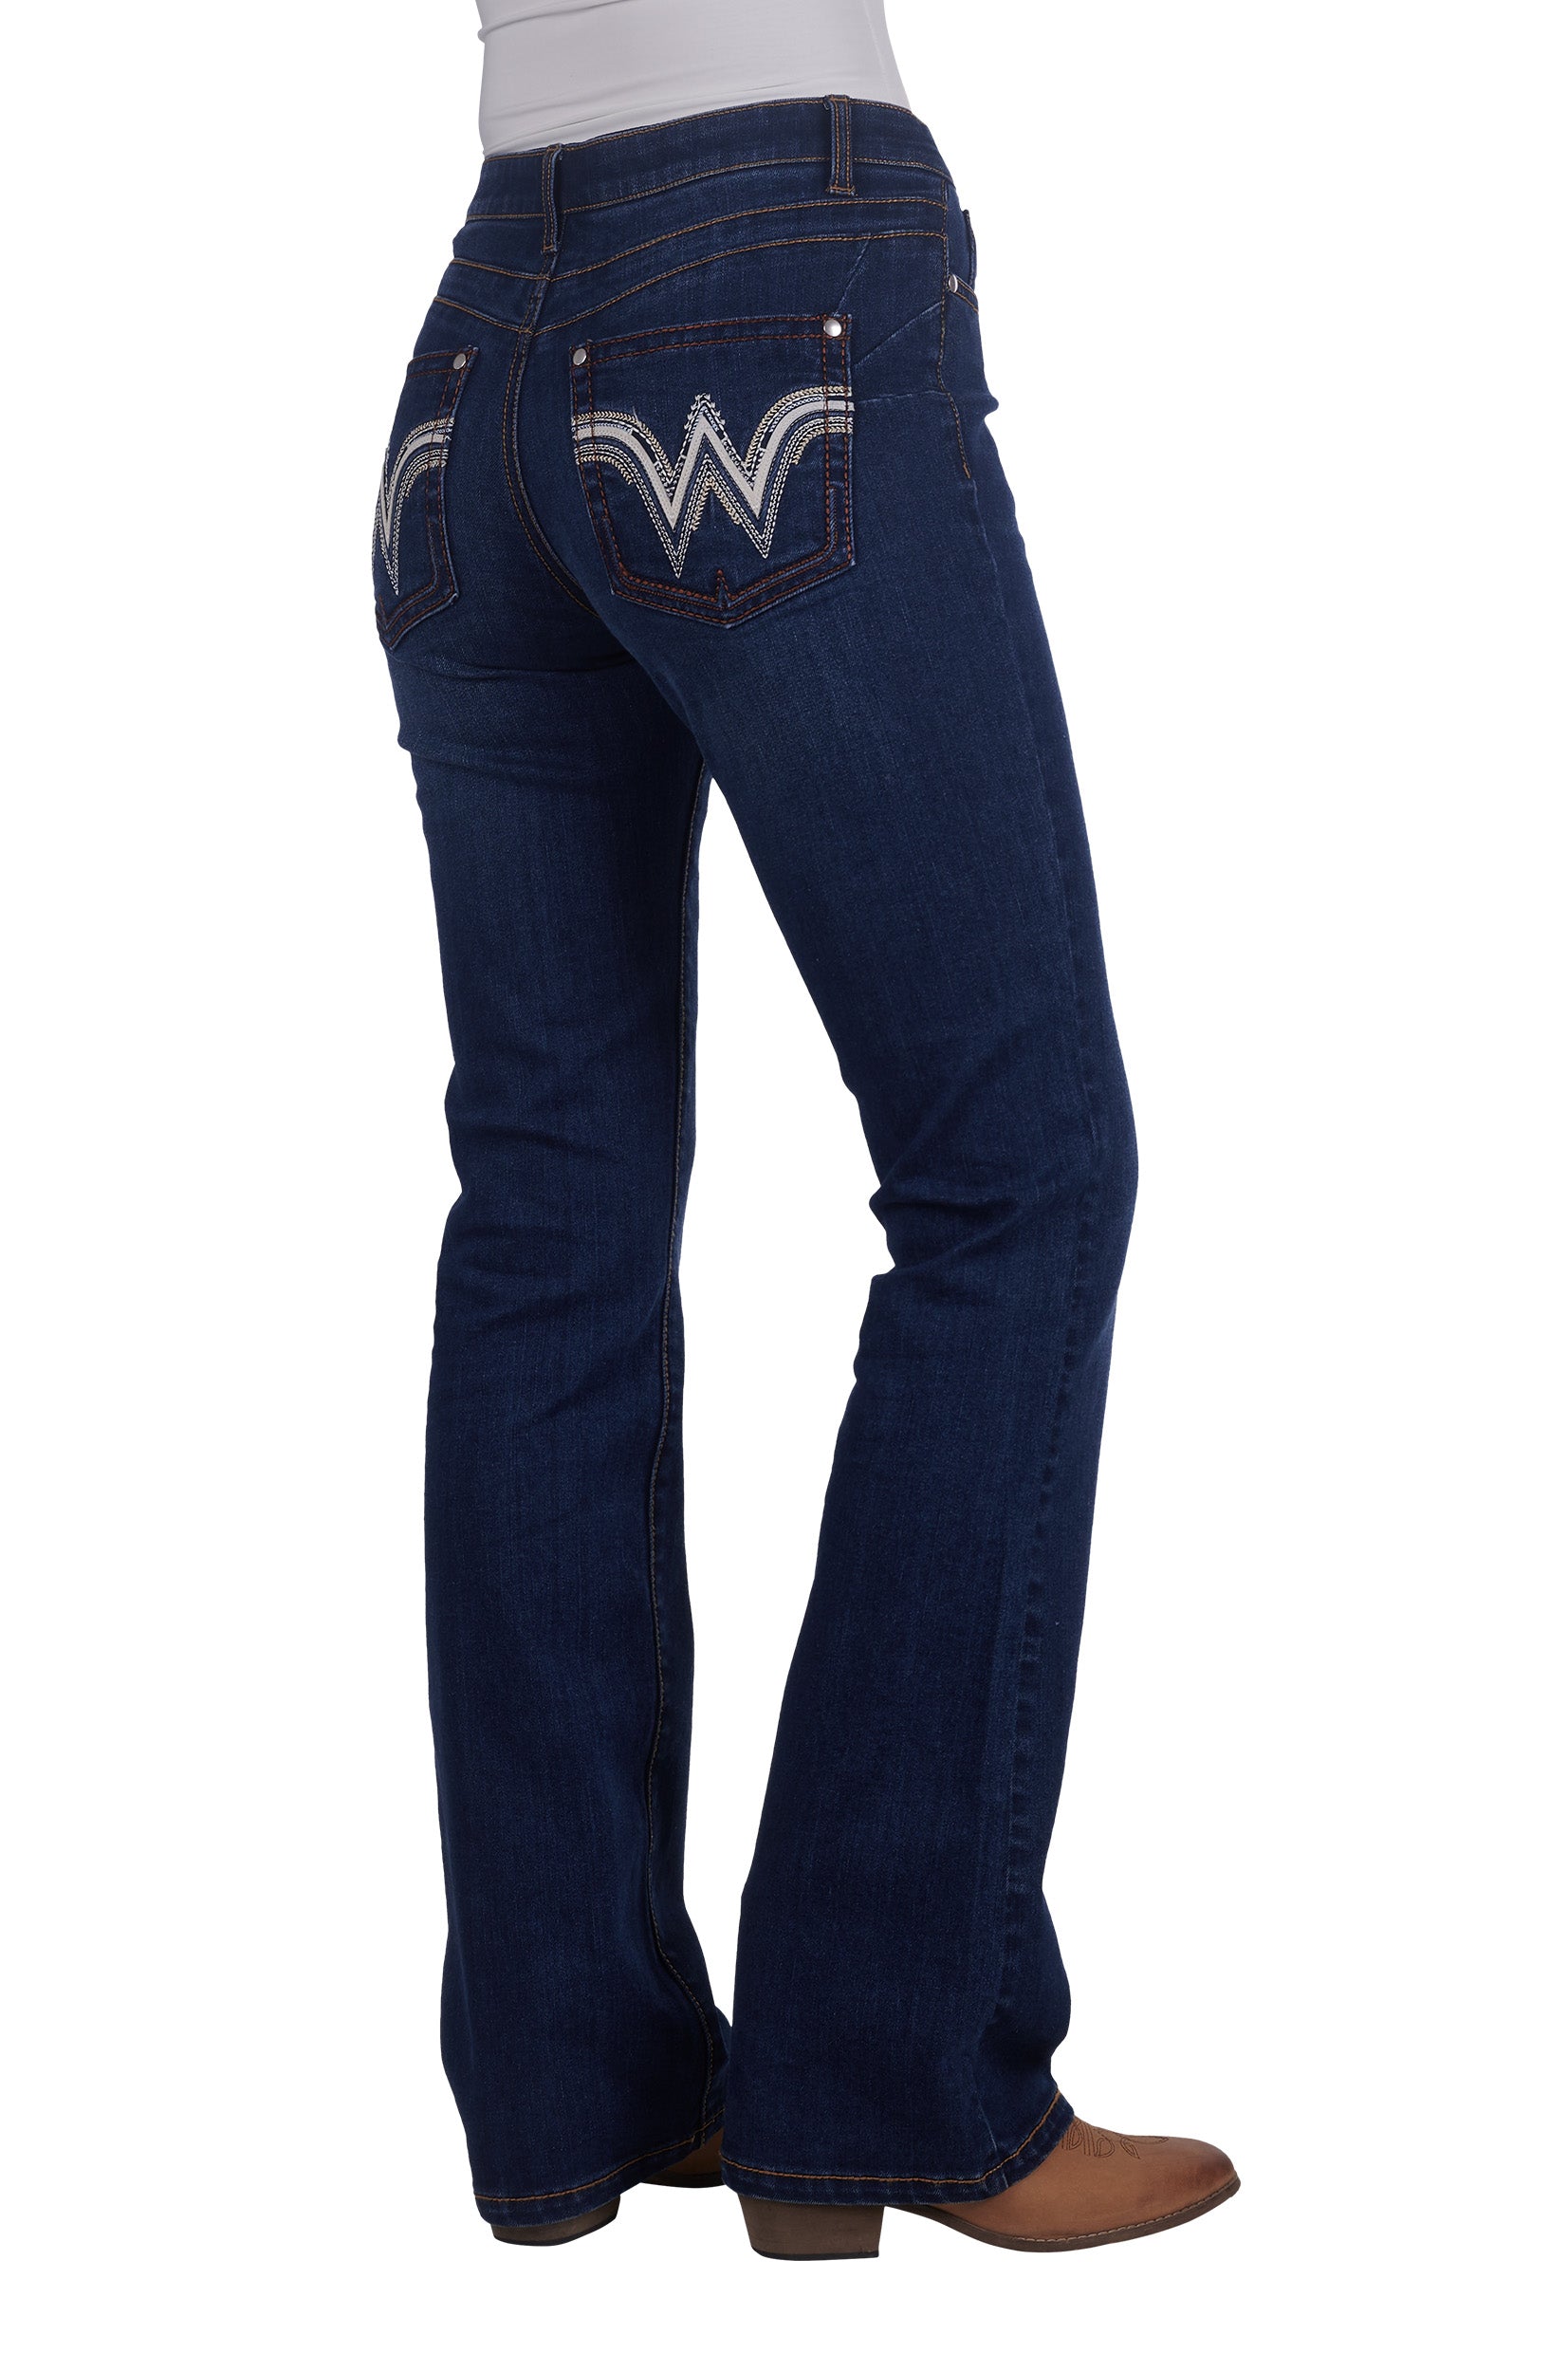 Wrangler Wmns Tilly Jean Q Baby Booty Up